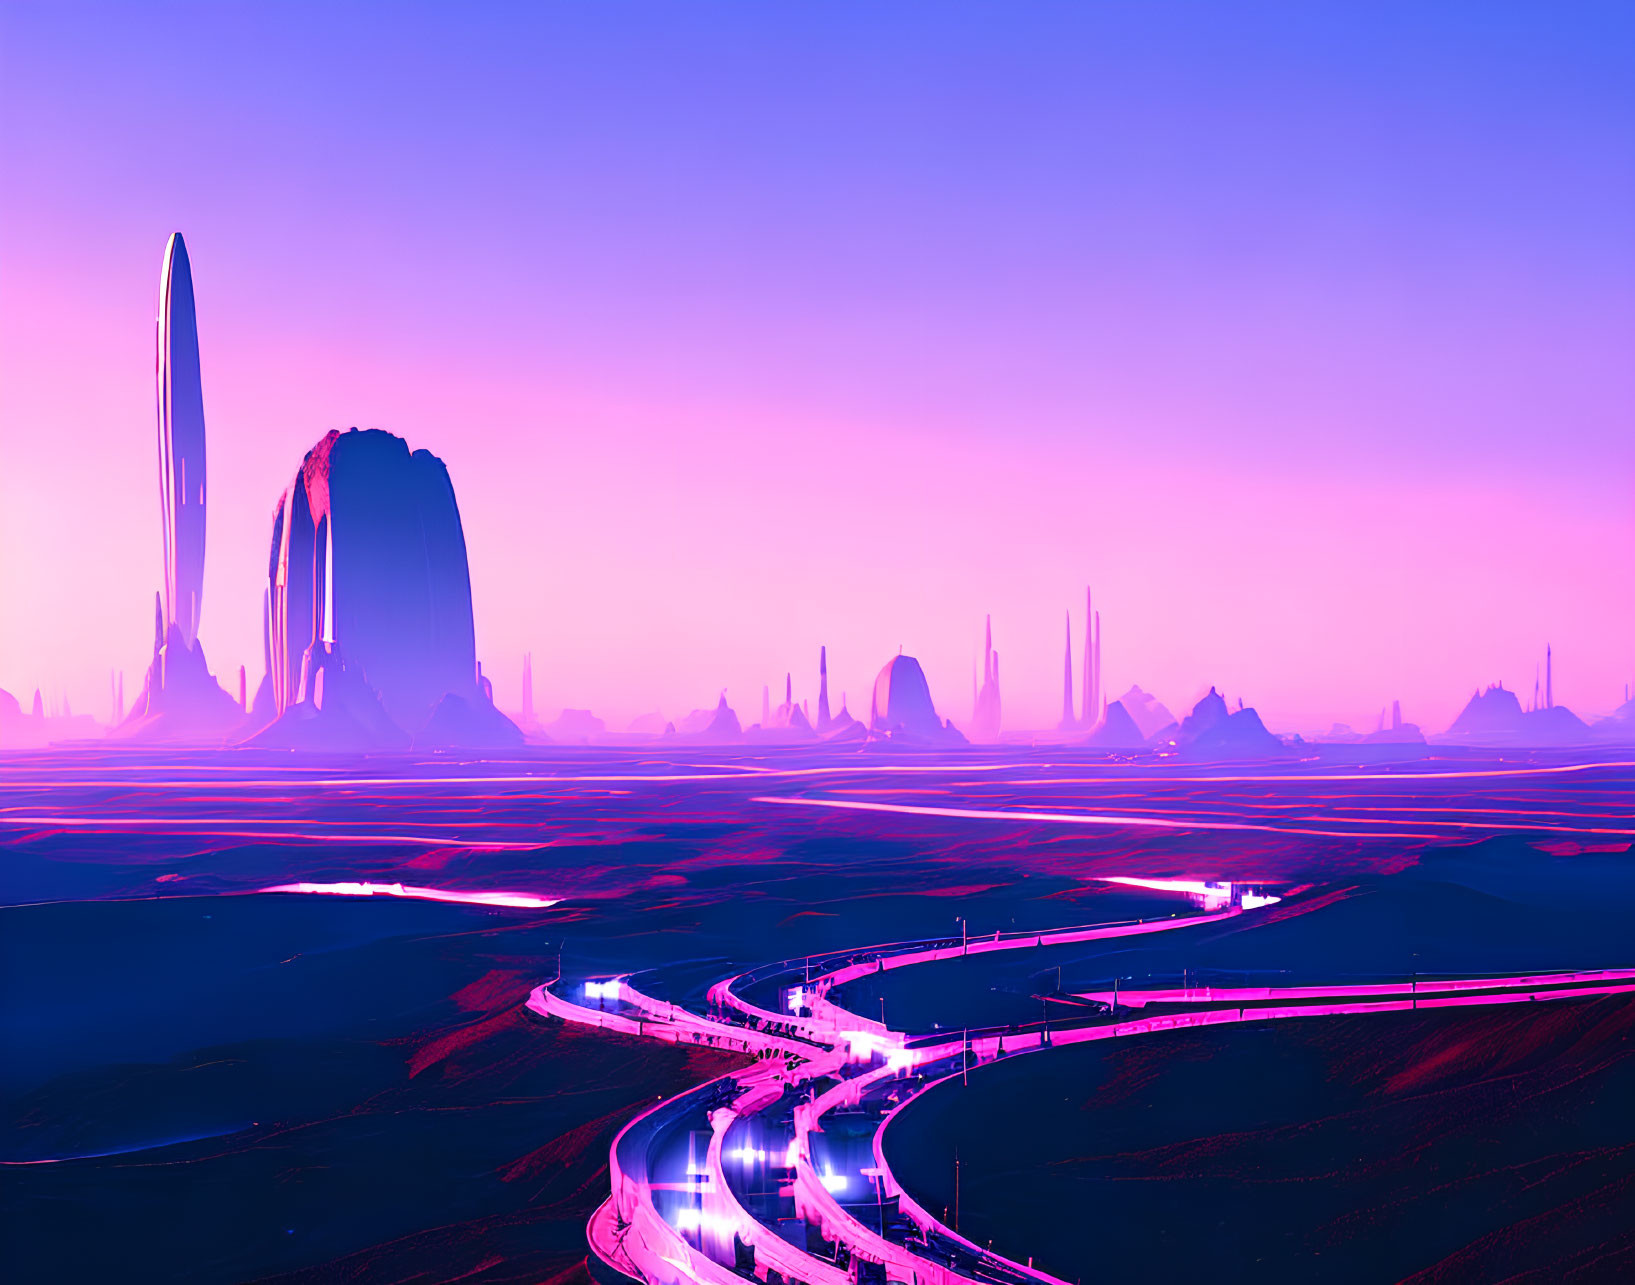 Futuristic cityscape at dusk with neon lights and towering spires